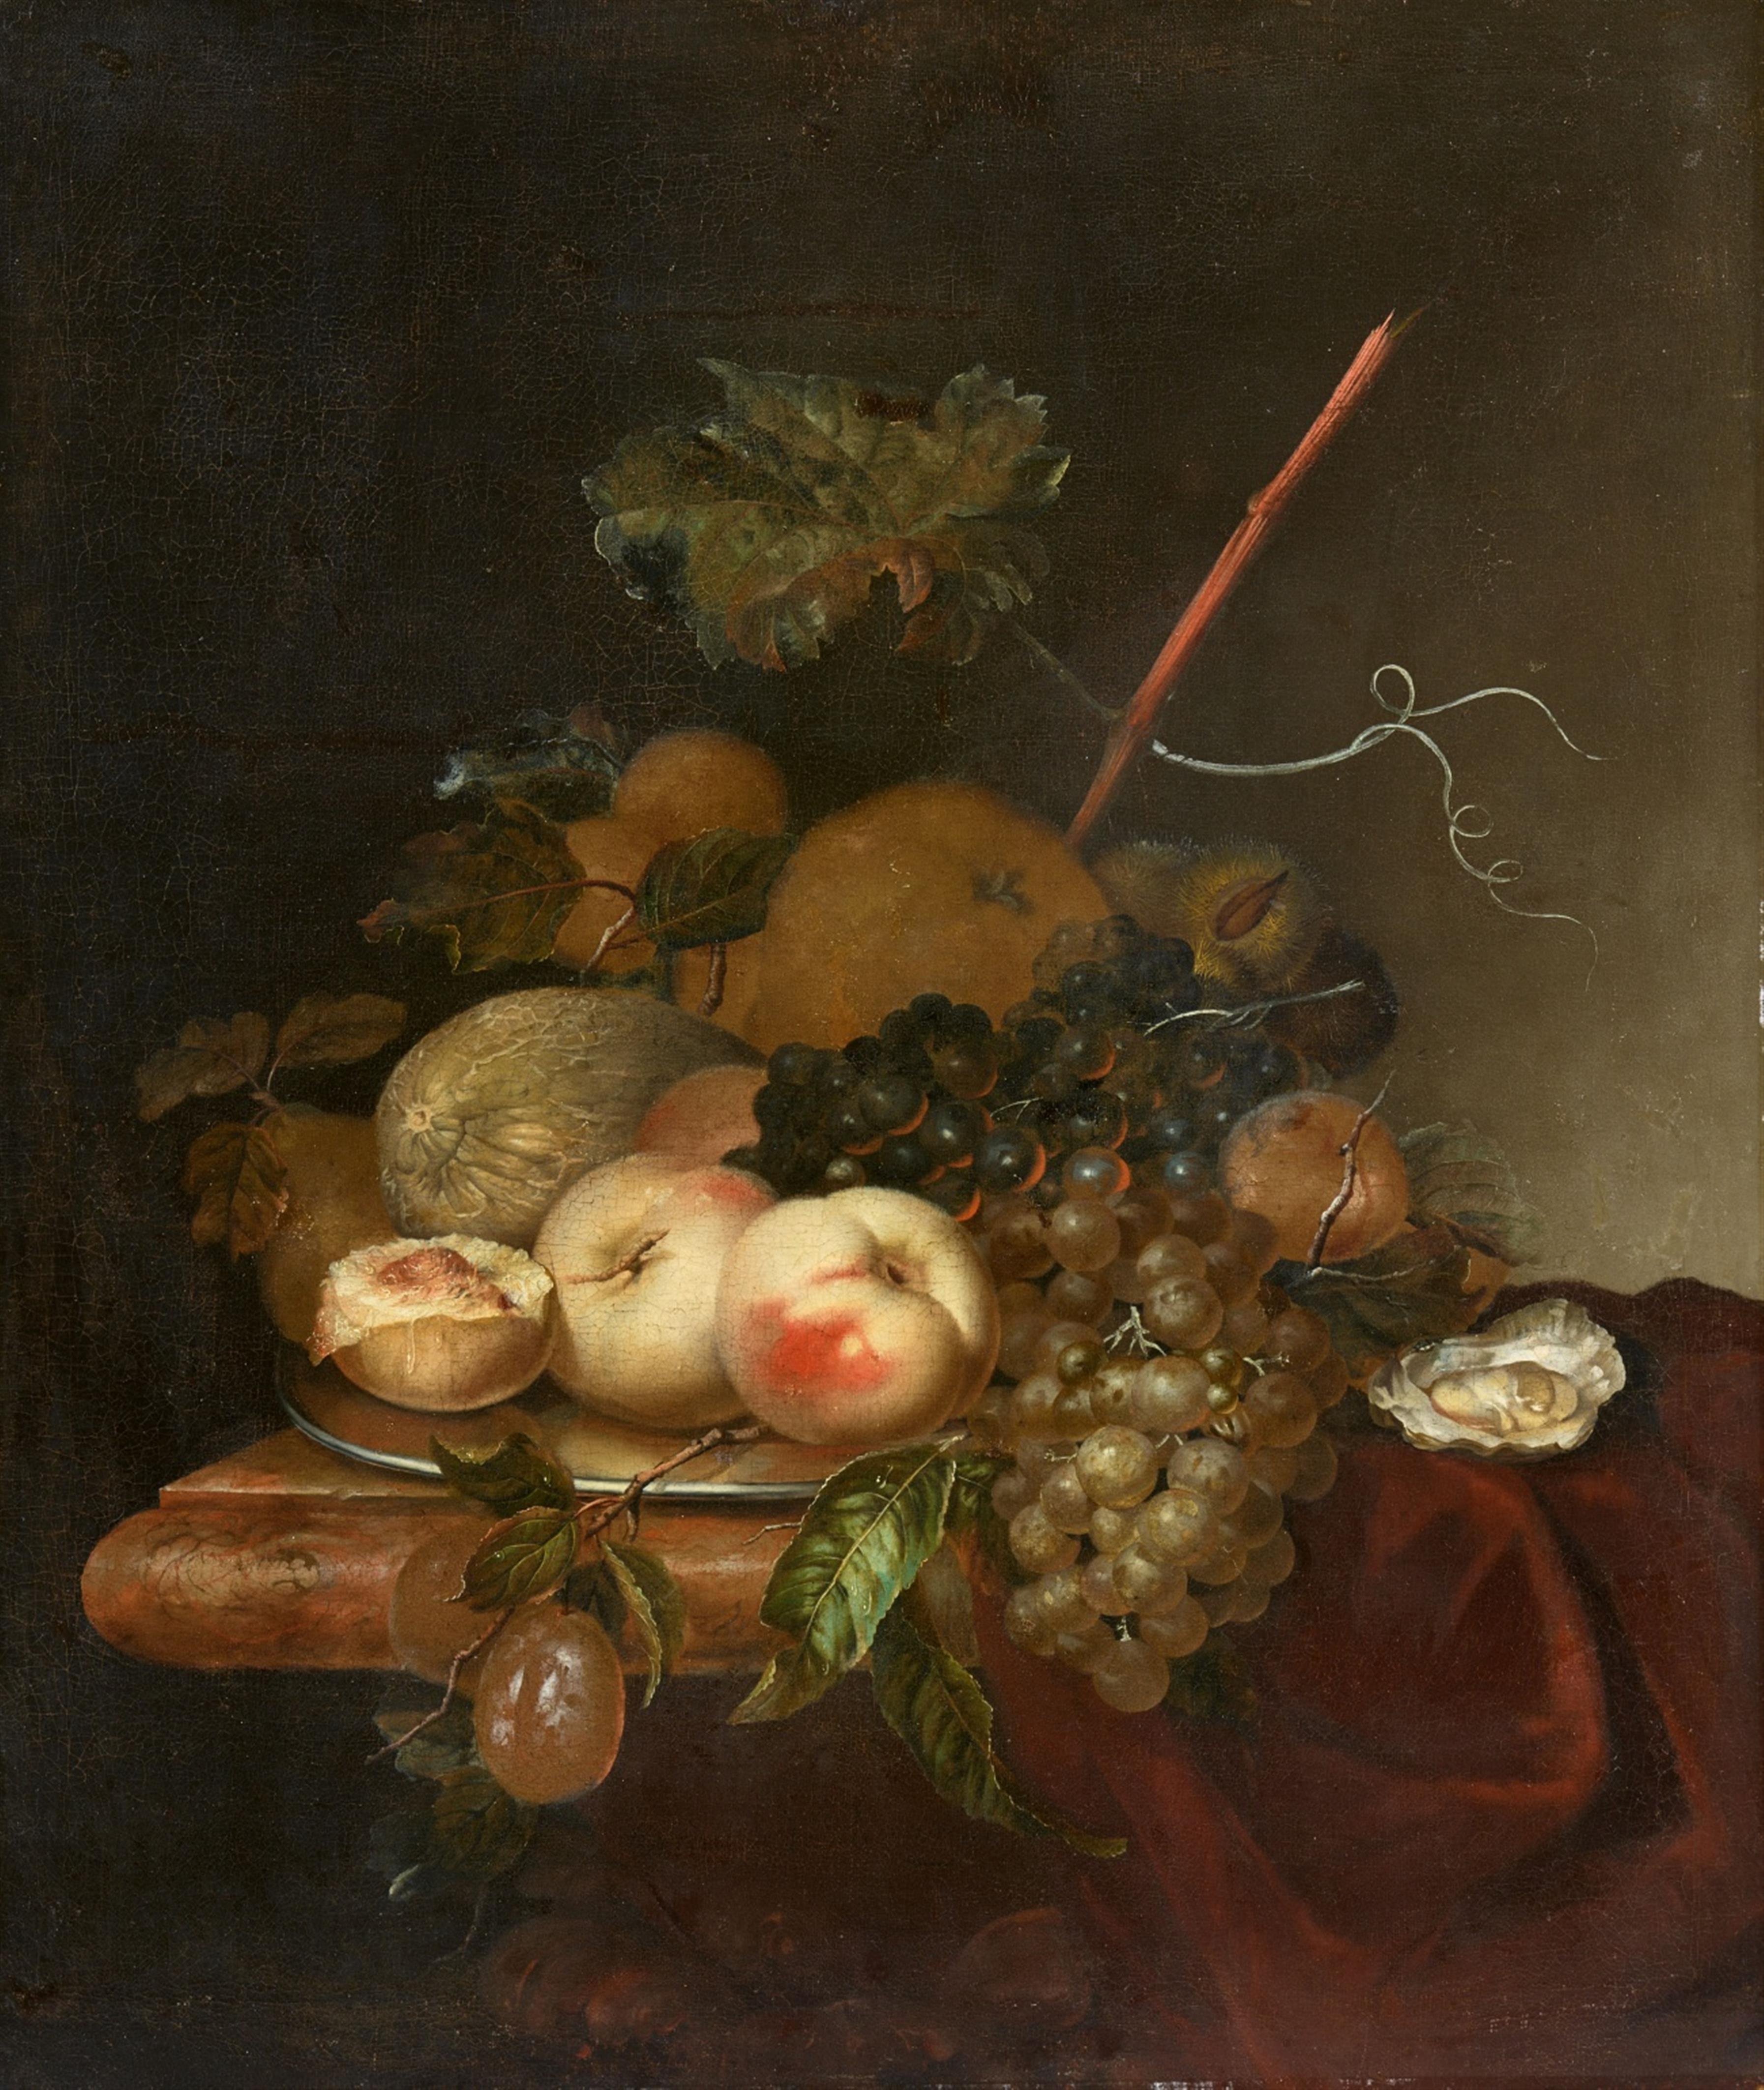 Herman van der Myn - Still Life with Fruit and an Oyster - image-1